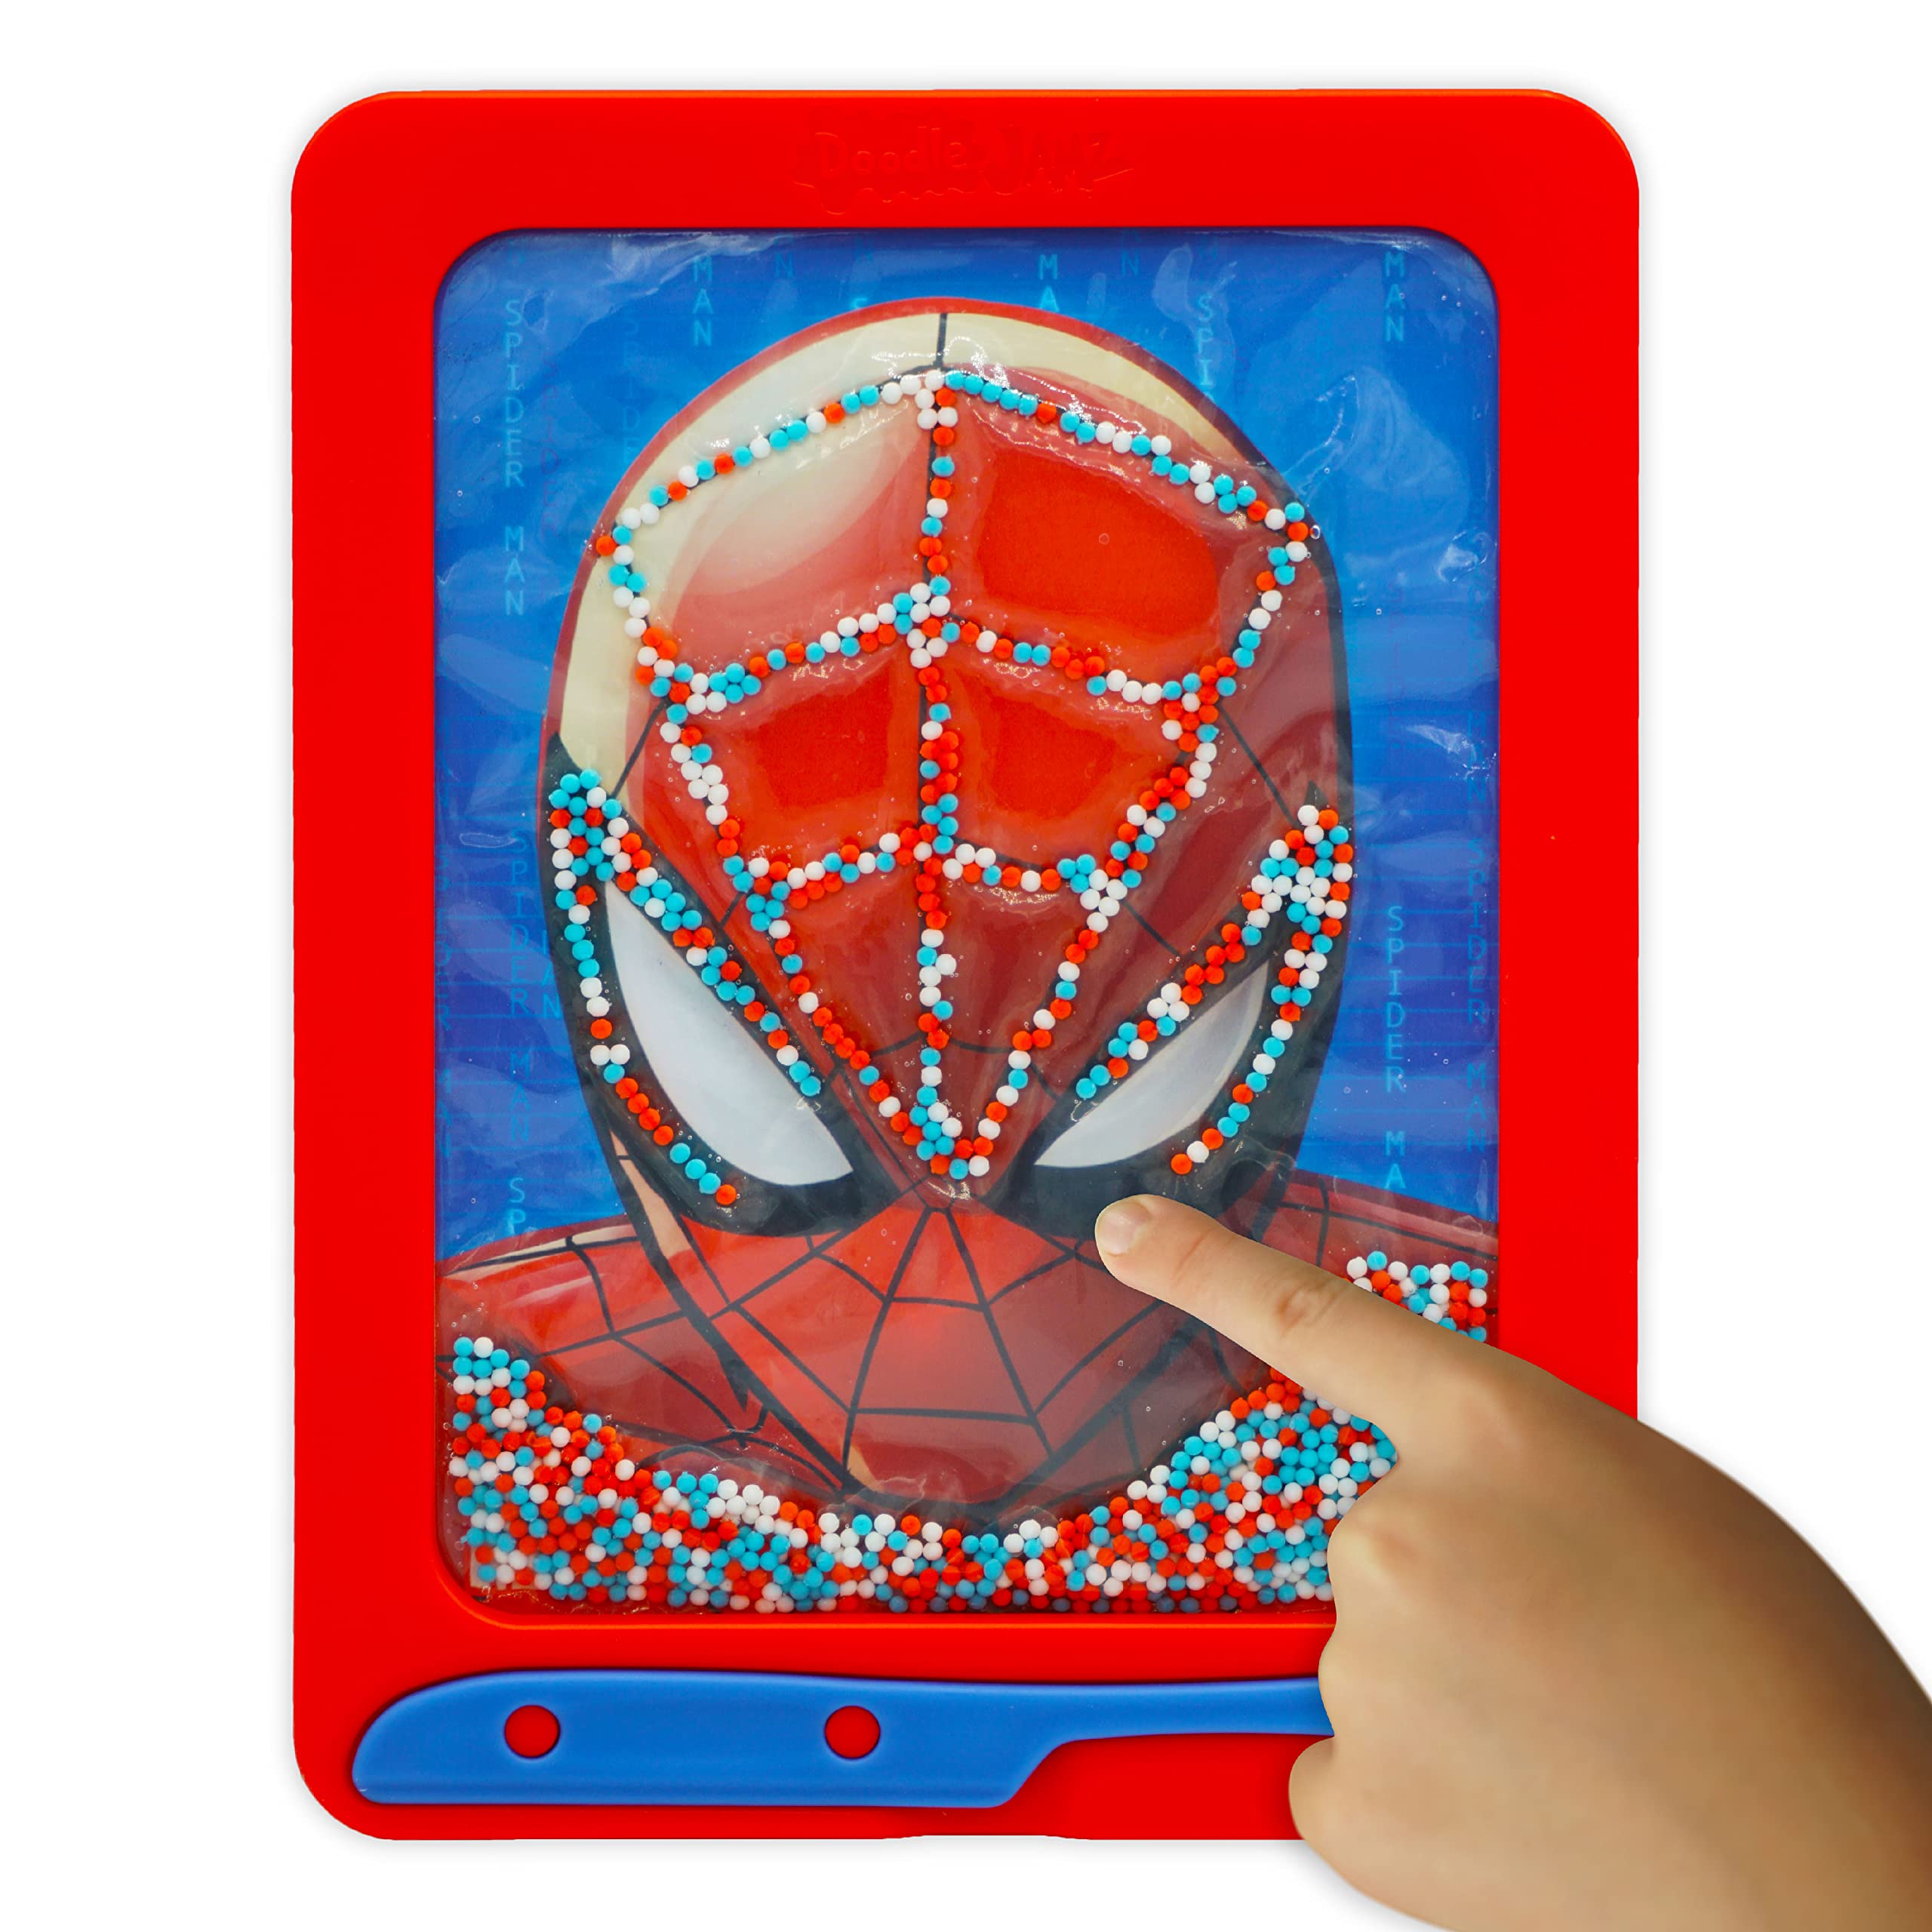 DoodleJamz Marvel JellyPics - Sensory Drawing Pads Filled with Non-Toxic Squishy Beads and Gel – Includes Stylus, Removable 2-Sided Emoji Backer Card (Spider-Man + Hulk Bundle)